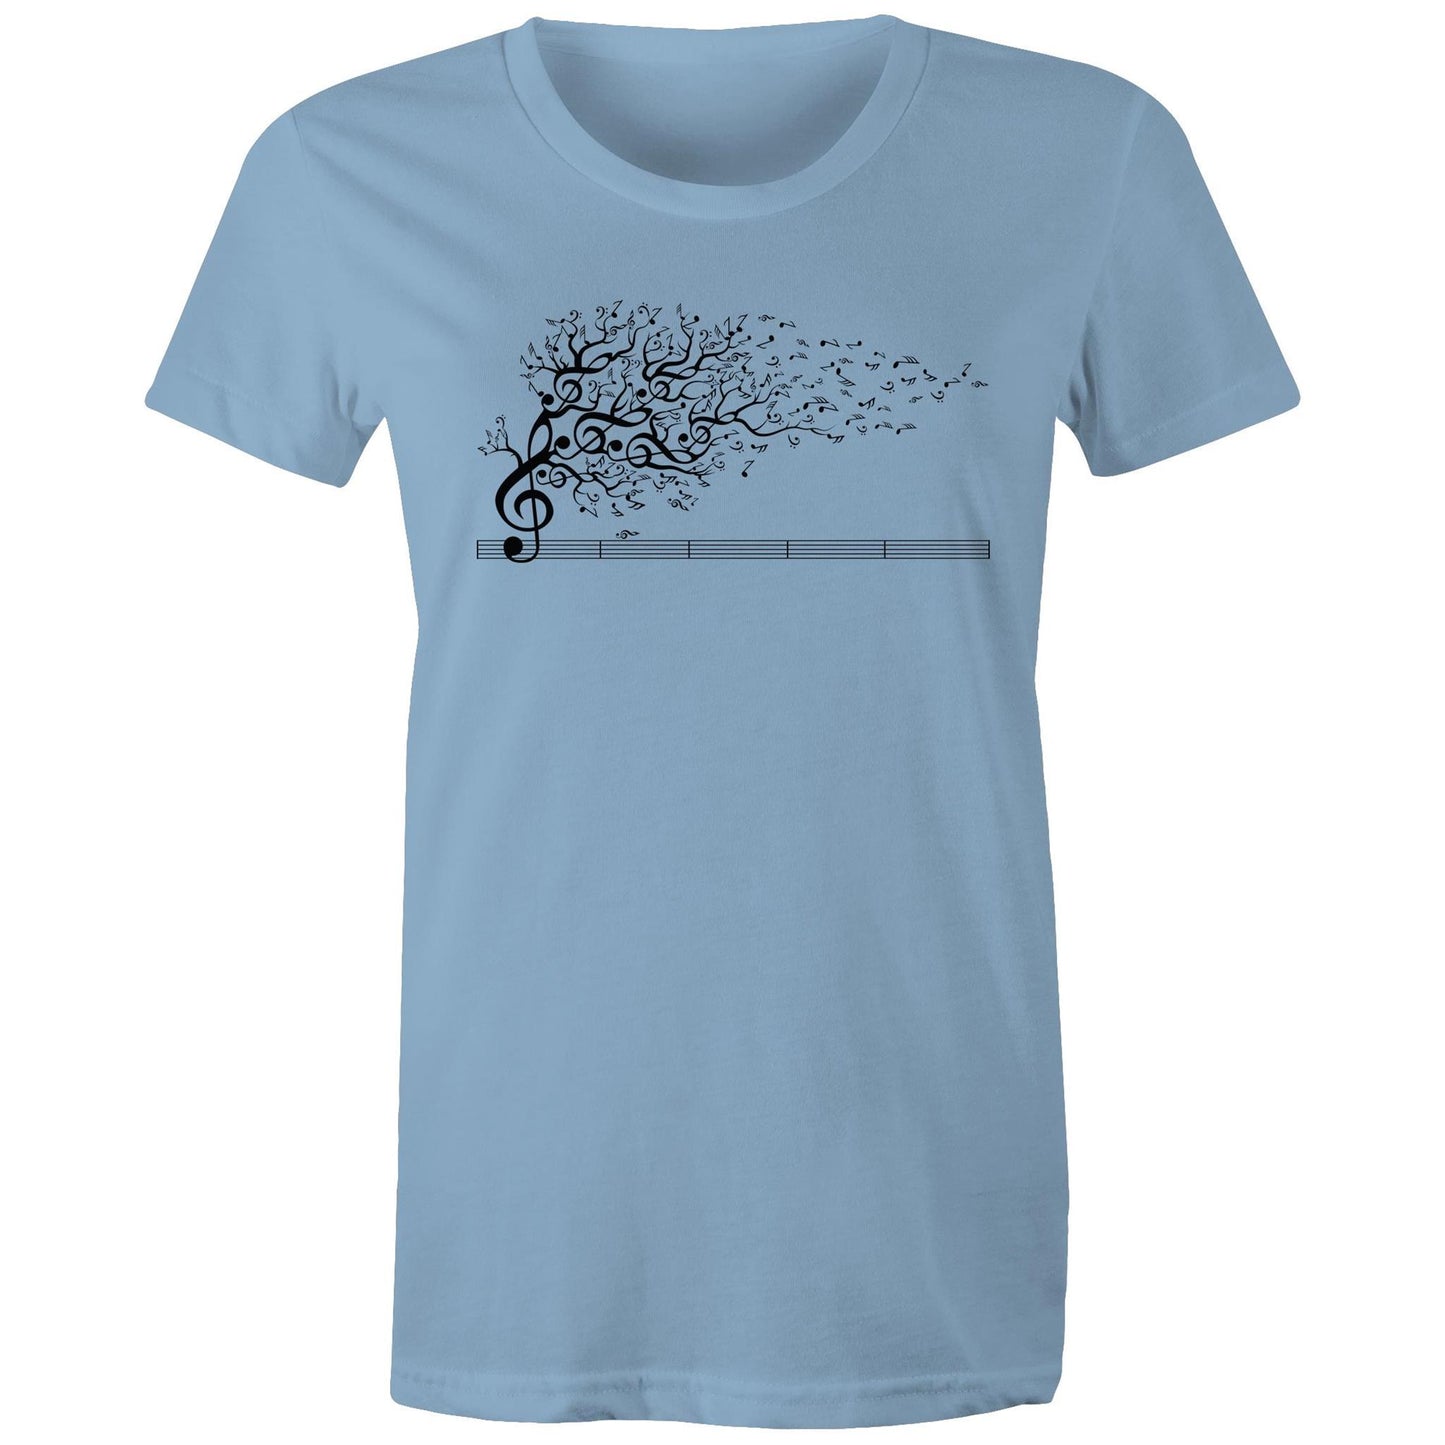 The Sound of Nature - Women's T-Shirt